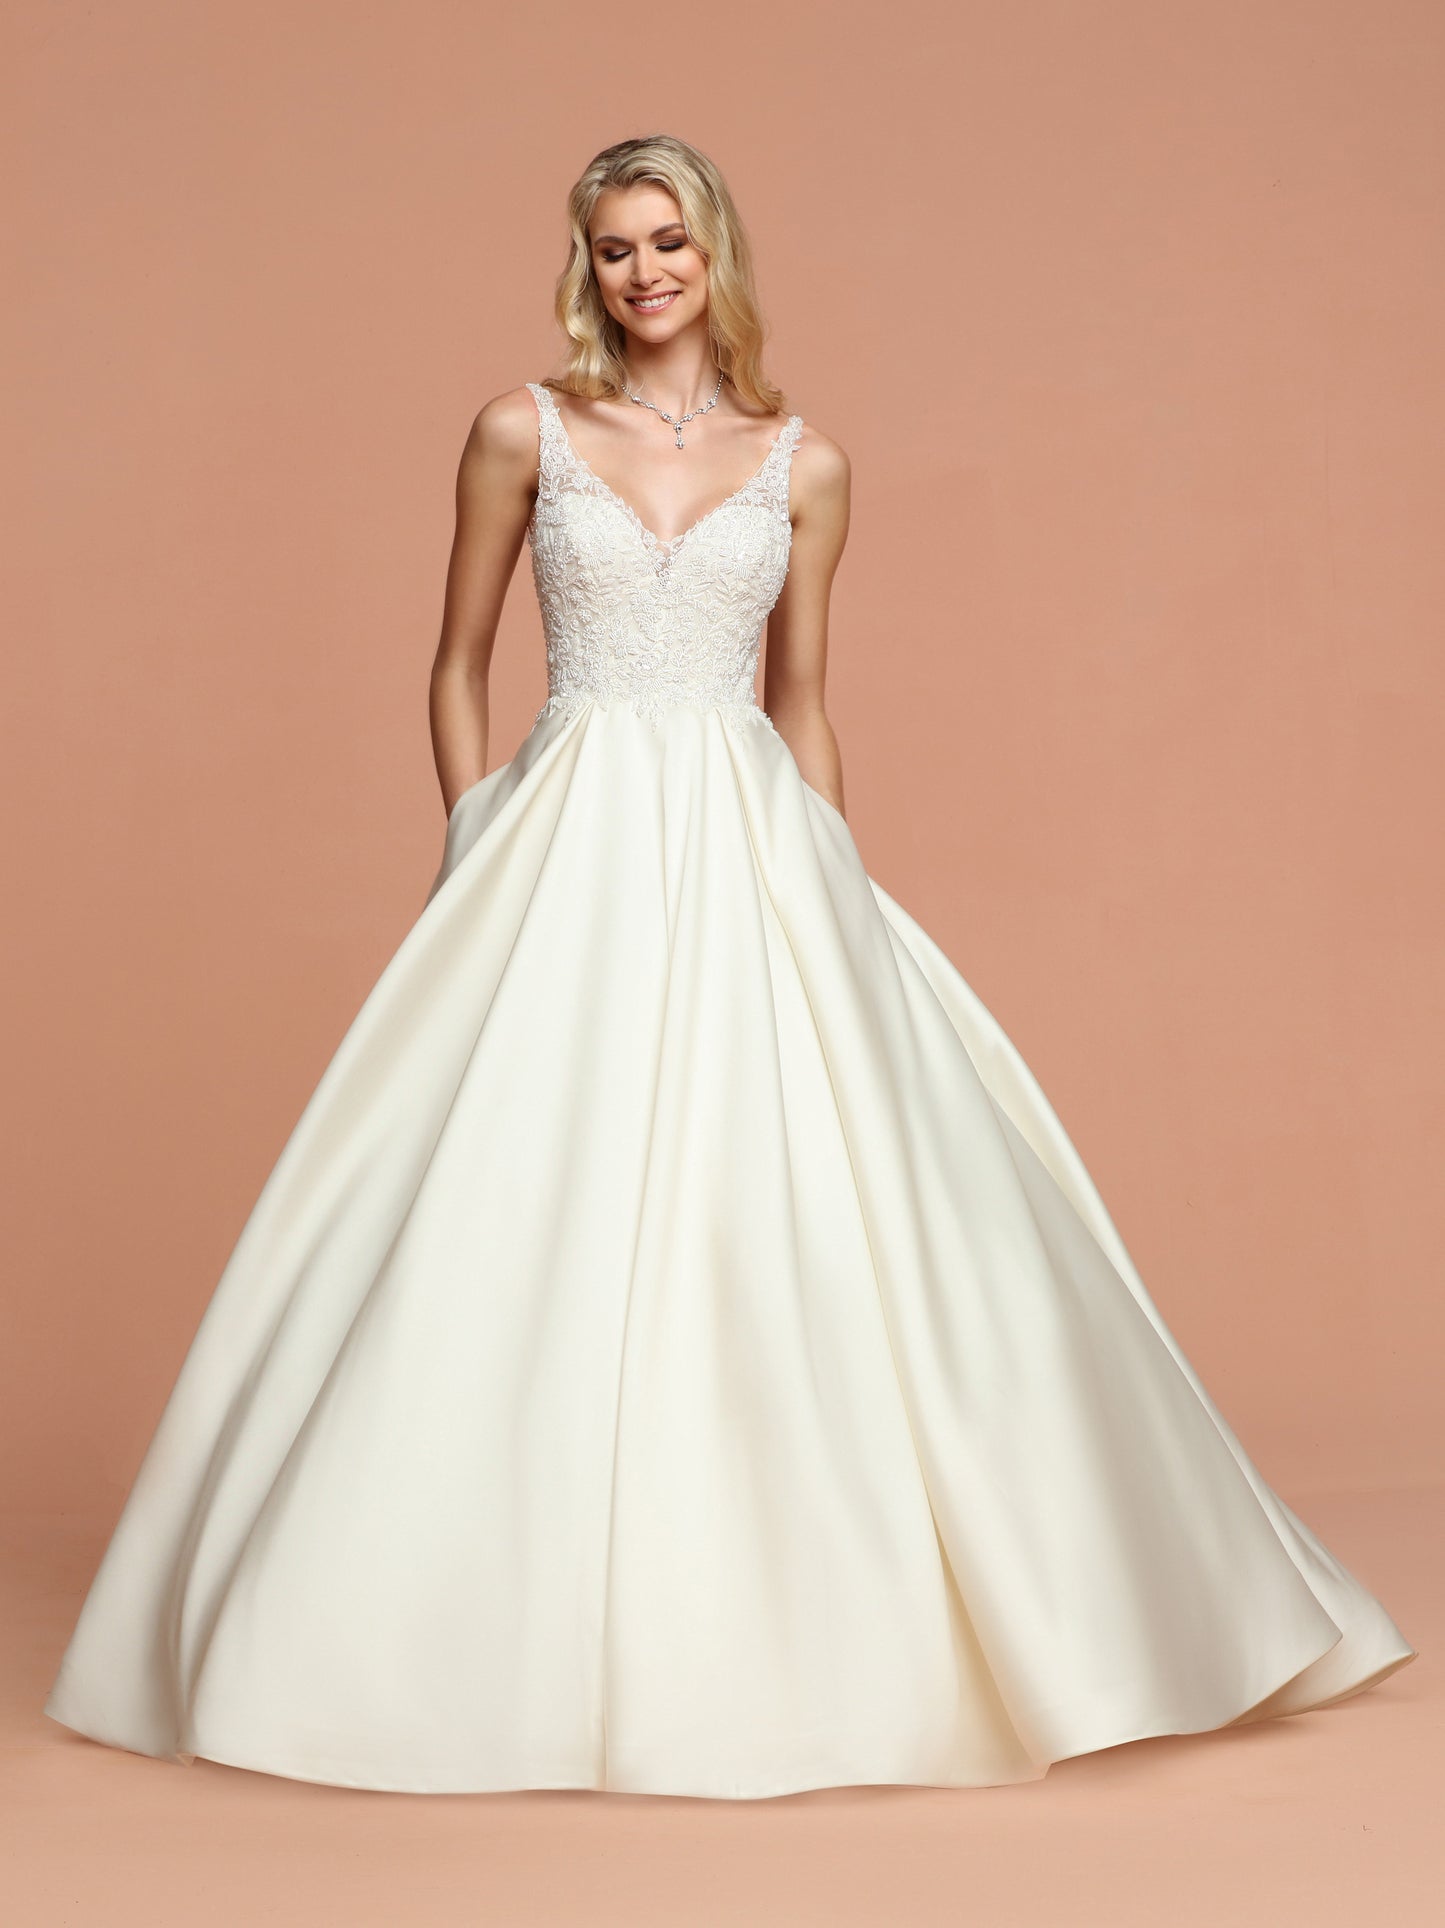 Davinci Bridal 50580 is a Sleek Mikado A-Line Ball Gown Wedding Dress with V-Neckline,Deep V-Back & Beaded Bodice. Full Mikado Ball Gown Skirt with Pleated Waist has Chapel Train. Hand Beading with Lace Applique, Pockets, Sequin Accent, V-Back, Zipper  Available for 1-2 Week Delivery!!!  Available Sizes: 2,4,6,8,10,12,14,16,18,20  Available Colors: Ivory  Available Colors: Ivory, White